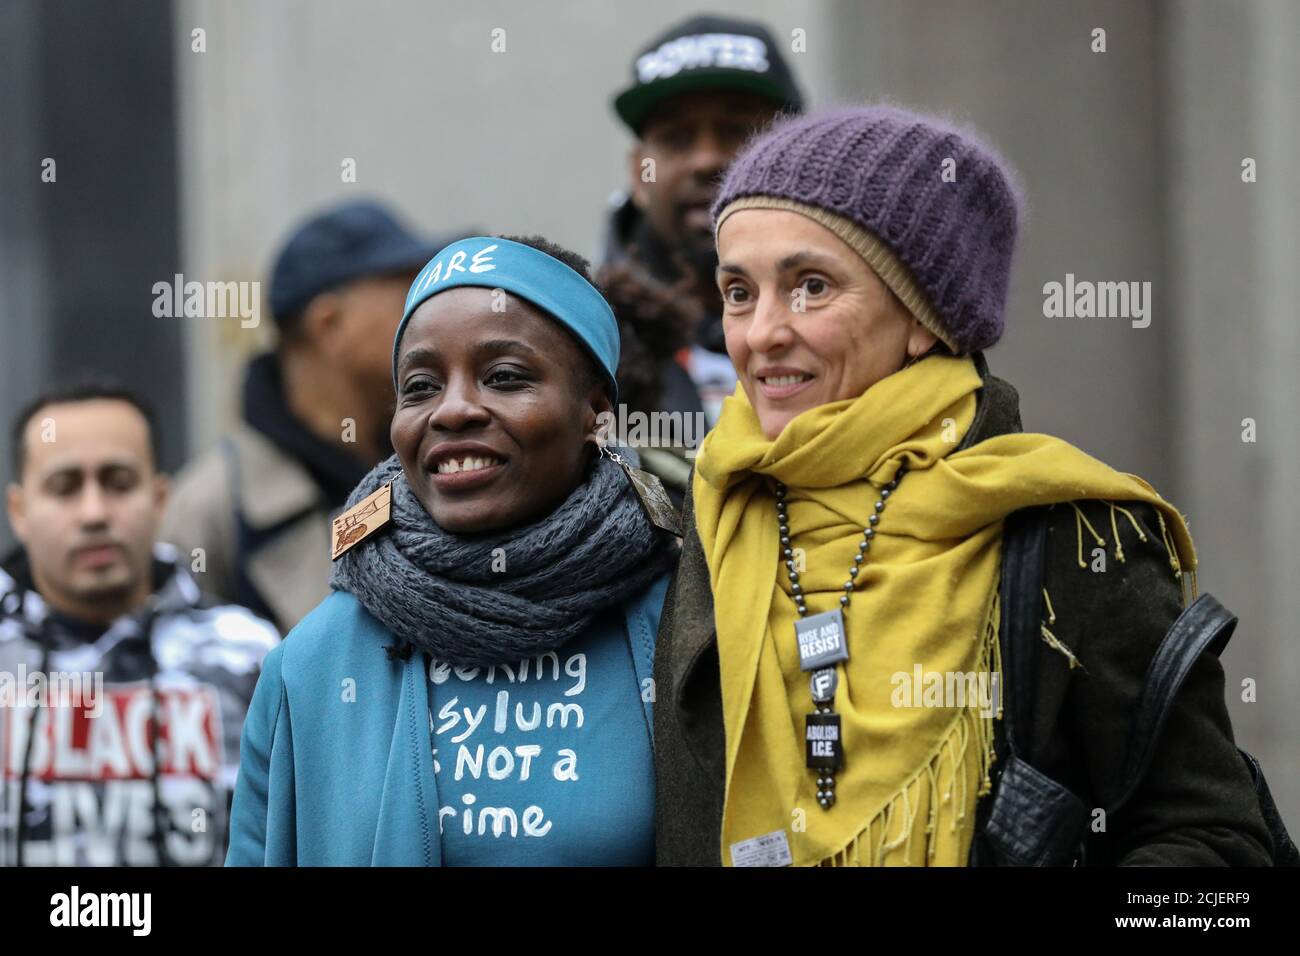 Therese Okoumou, Statue of Liberty climber, walks with an activist at the United States Courthouse in the Manhattan borough of New York City, New York, U.S., December 17, 2018. REUTERS/Jeenah Moon Stock Photo